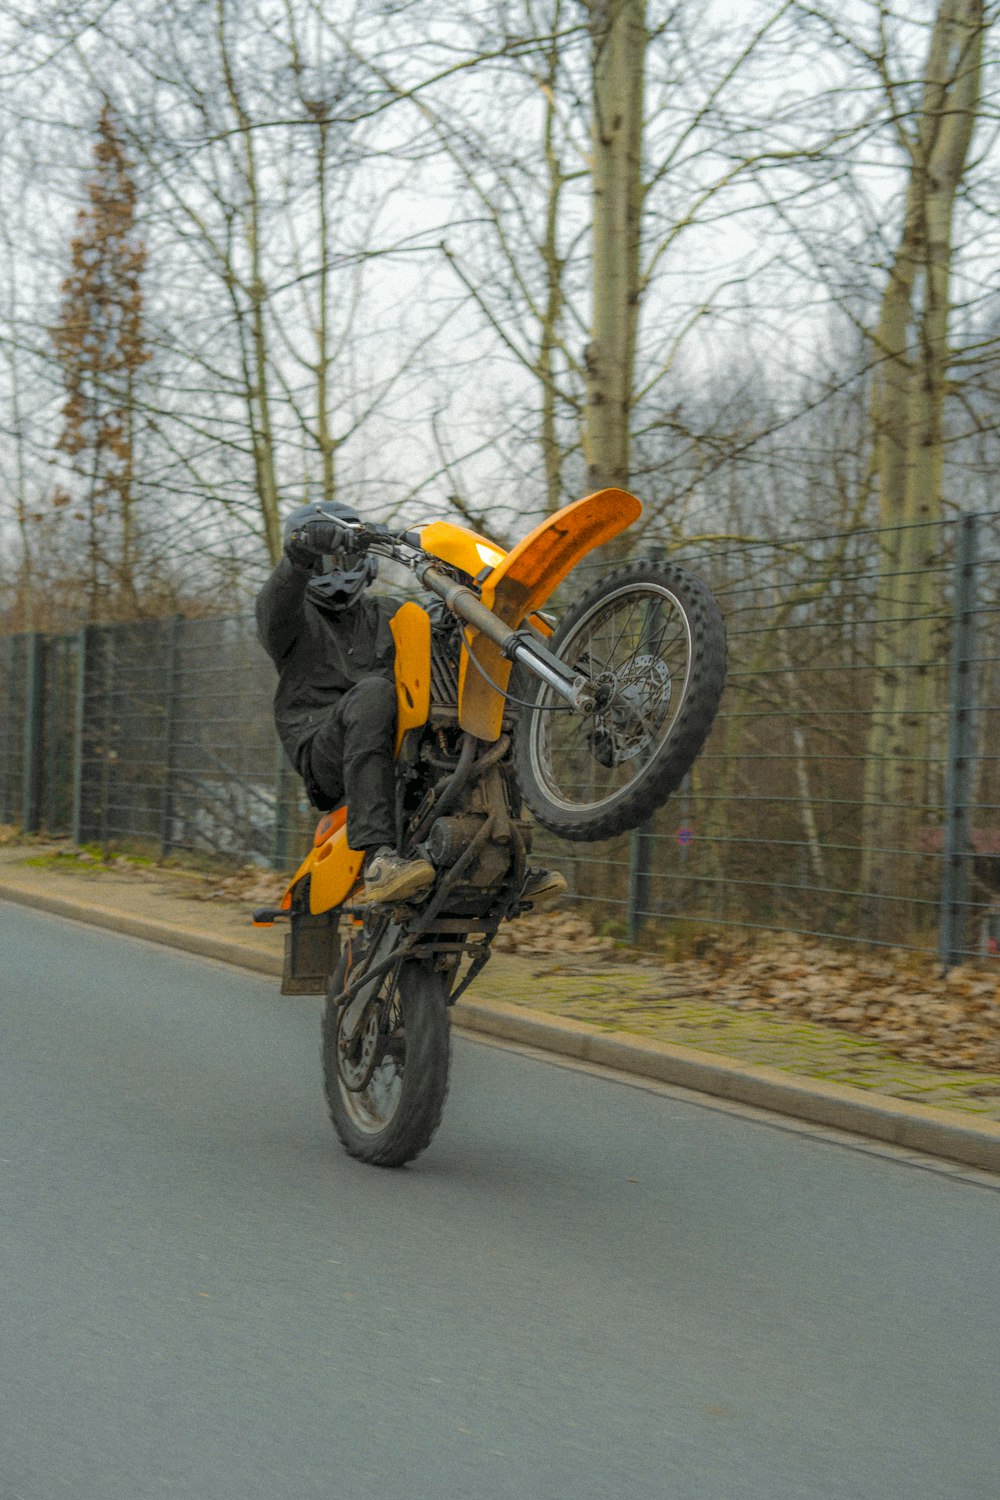 a person on a motorcycle doing a trick in the air